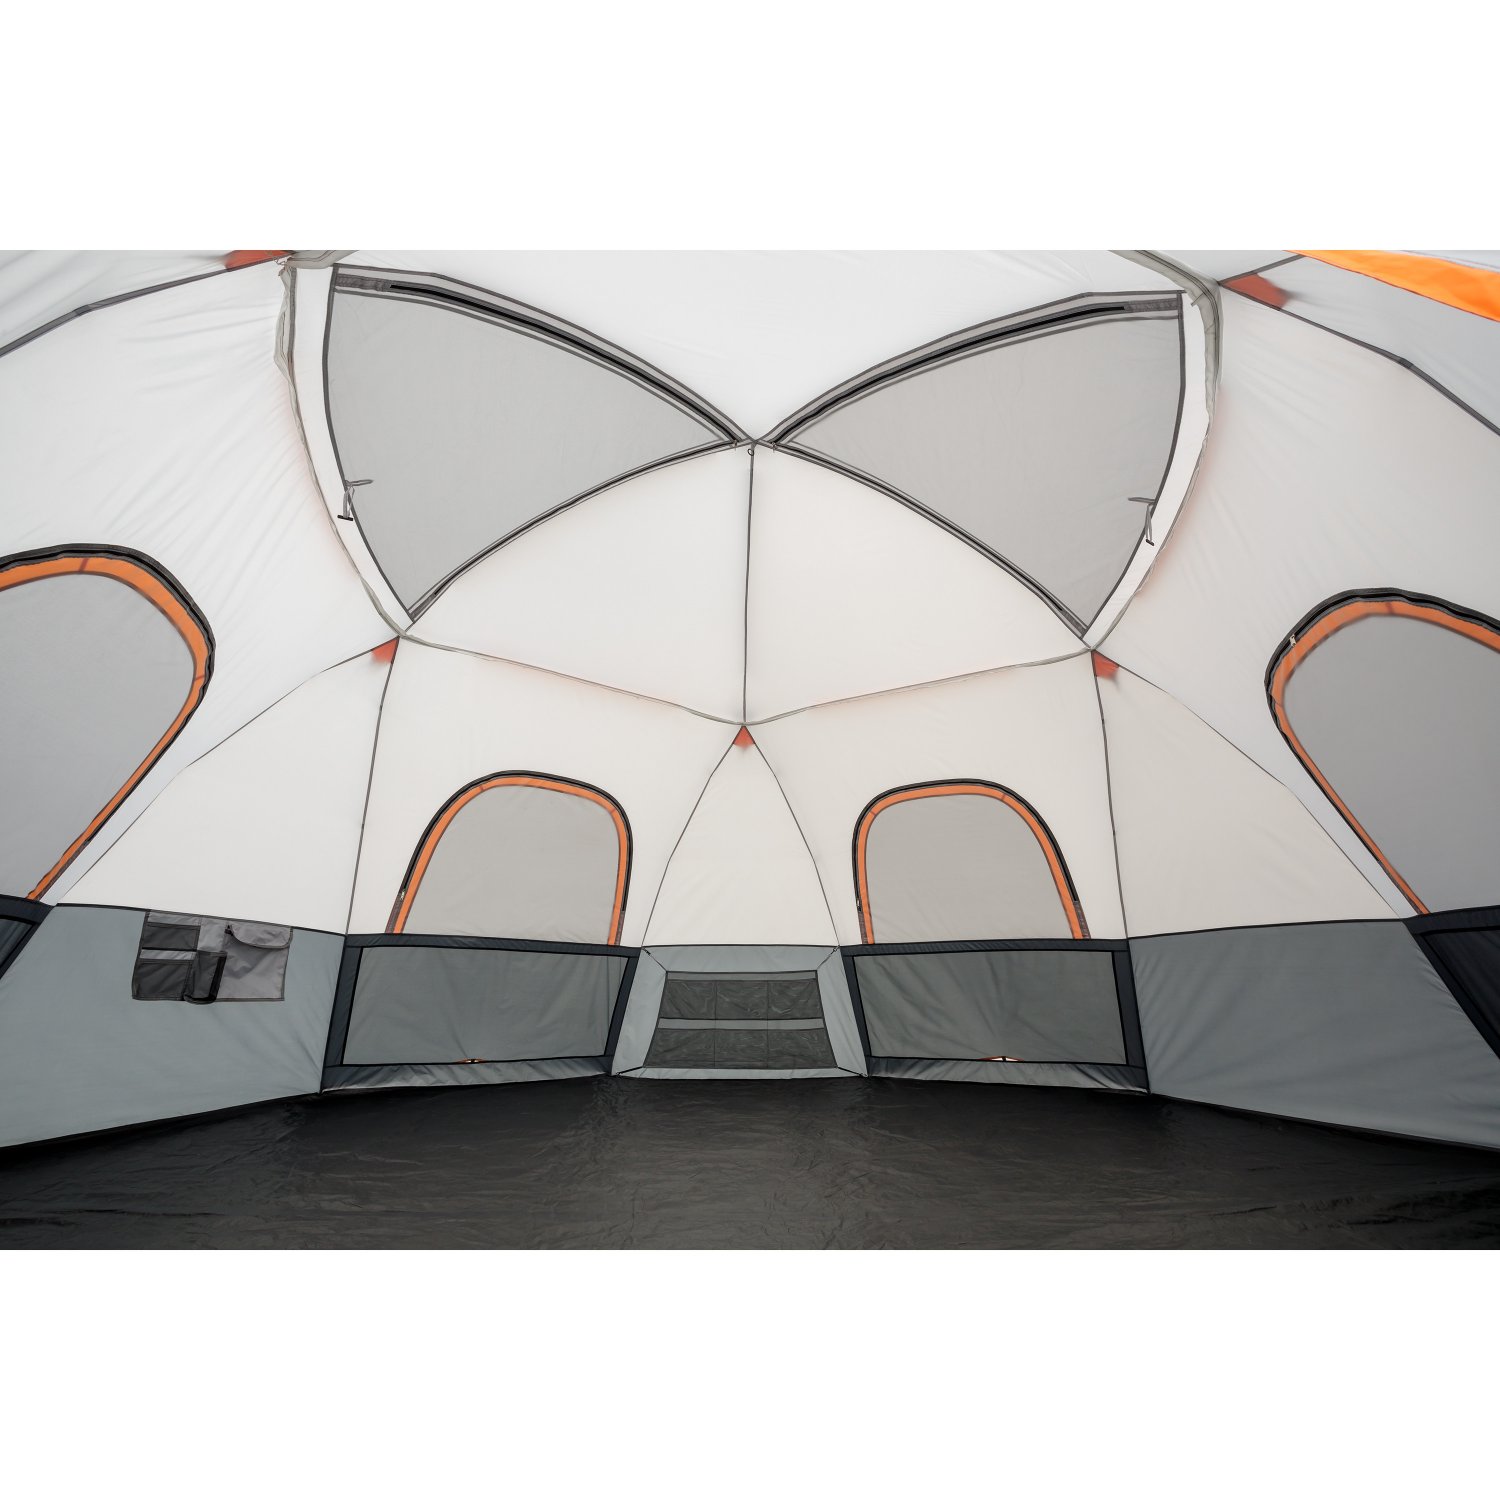 Ozark Trail 15’ x 15’ 9-Person Lighted Sphere Tent